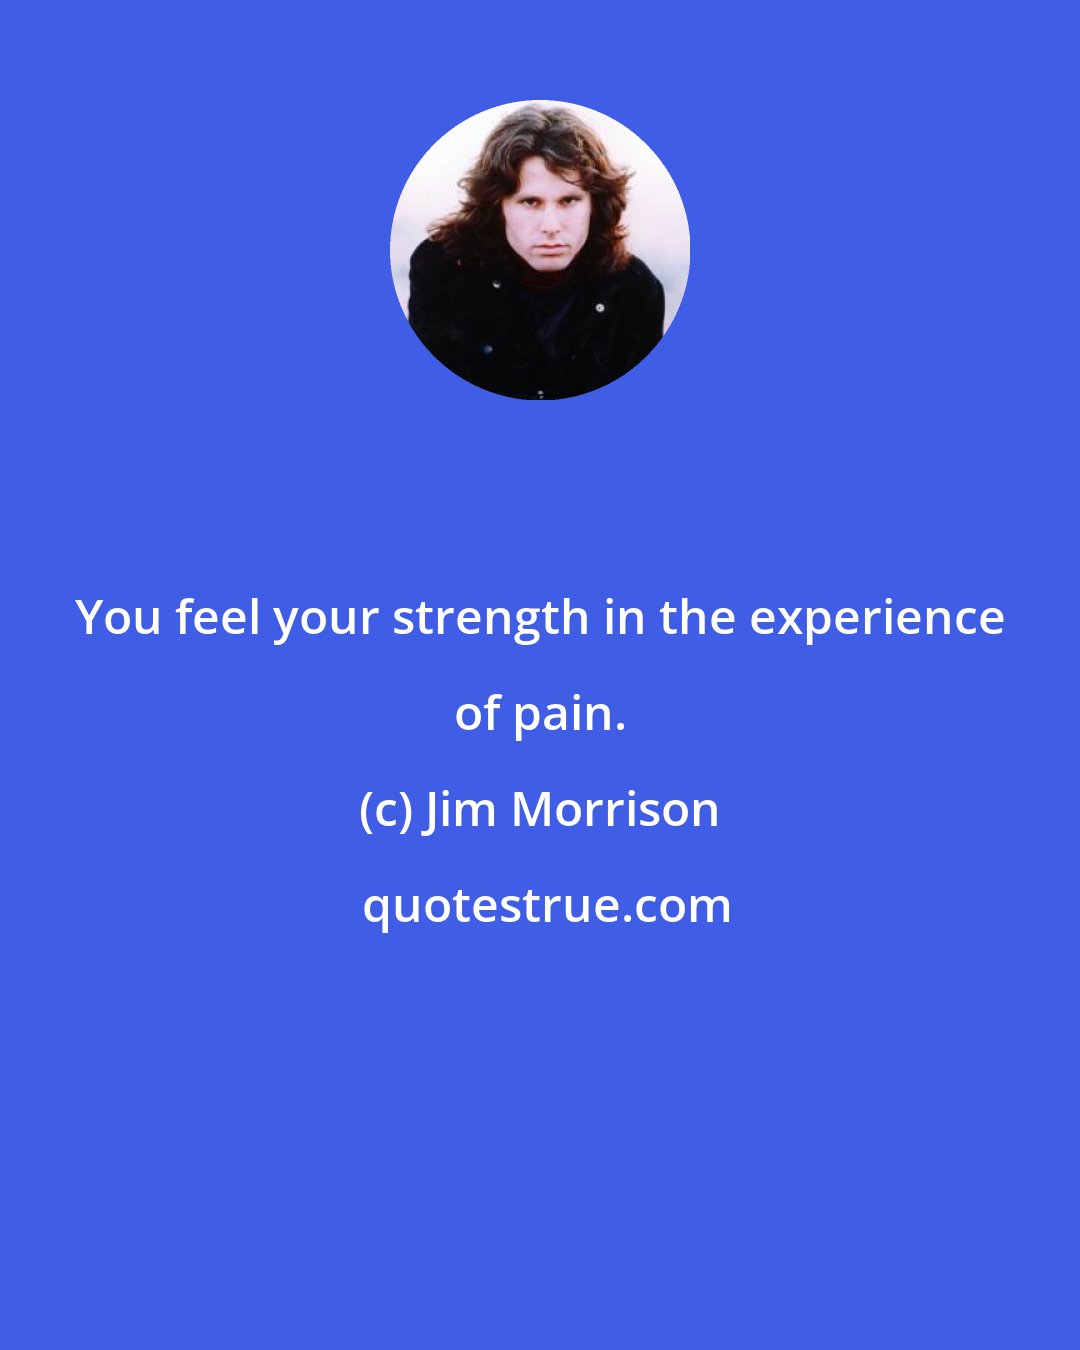 Jim Morrison: You feel your strength in the experience of pain.